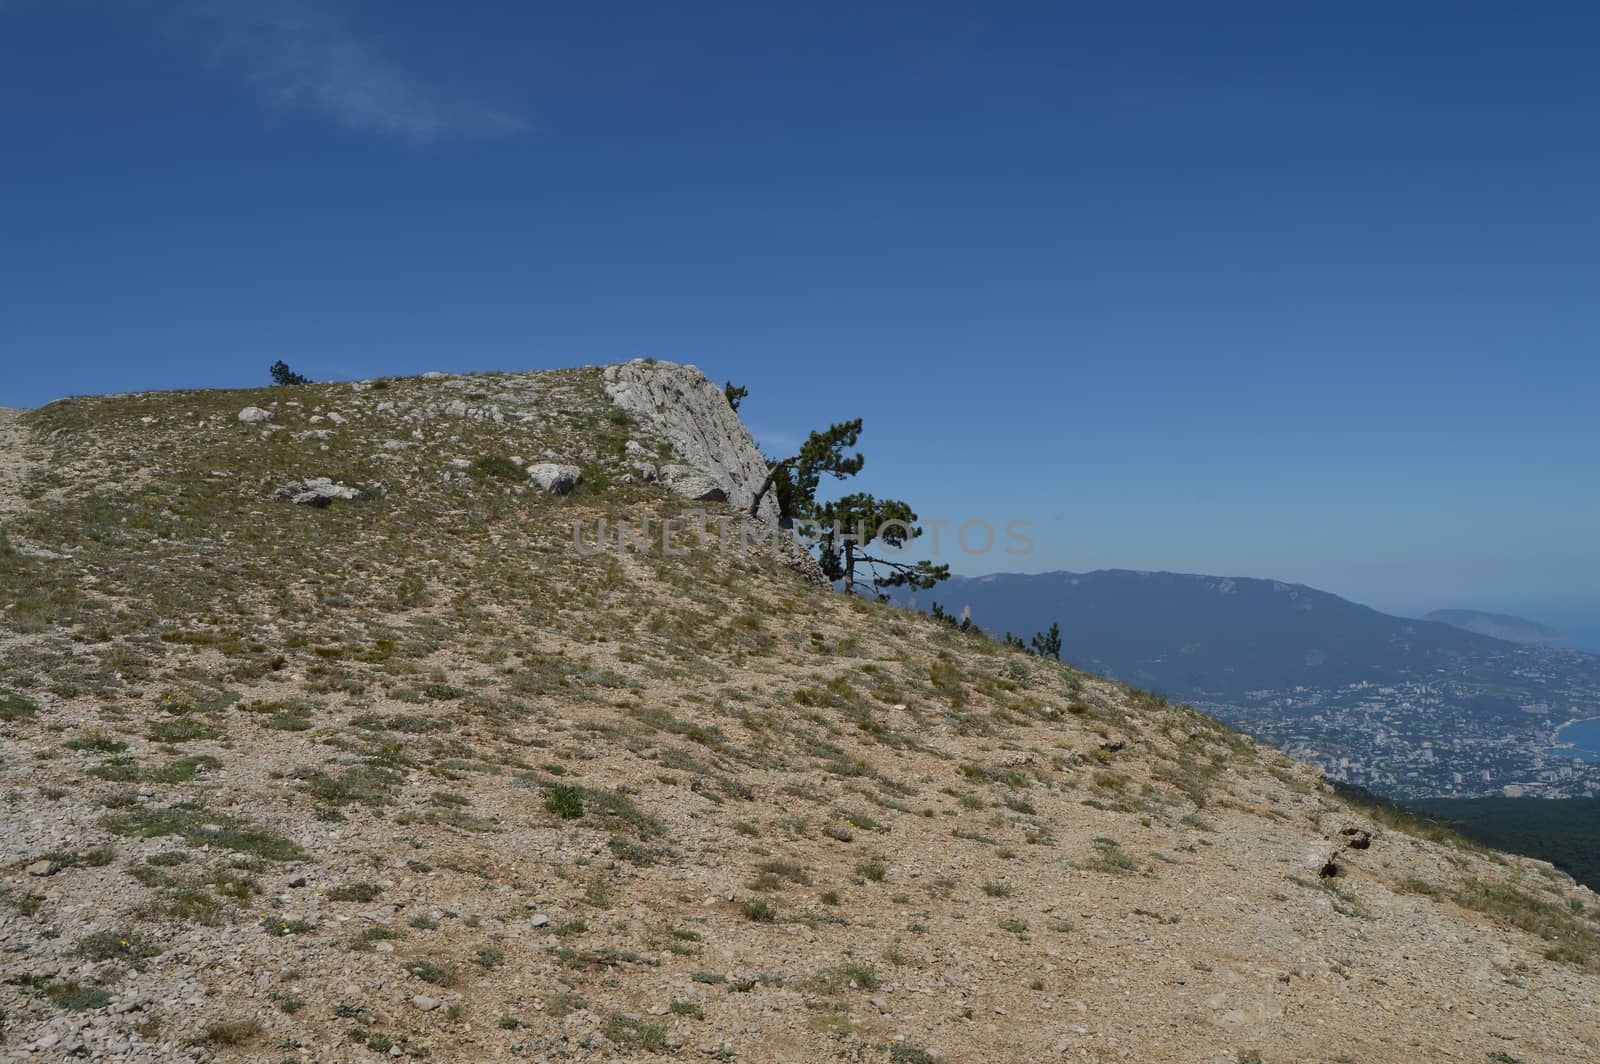 A lonely pine tree with a curving trunk on a mountainside, against a blue sky by claire_lucia